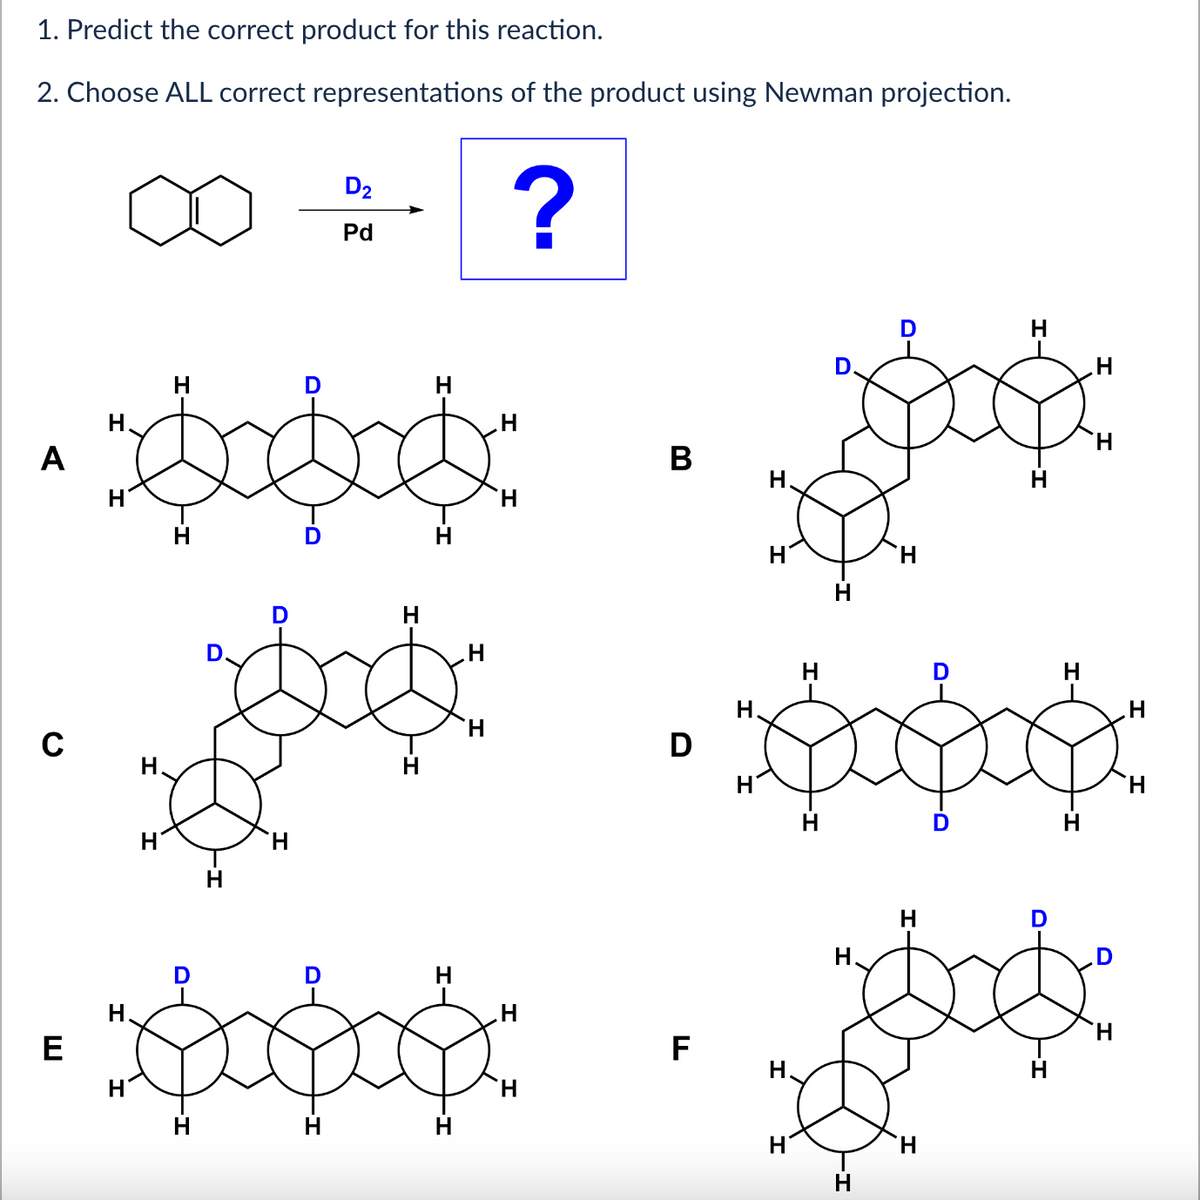 1. Predict the correct product for this reaction.
2. Choose ALL correct representations of the product using Newman projection.
A
C
E
H
H
H
H
H
H
H
D
H
D
H
D
D₂
Pd
H
H
H
H
?
H
H
H
H
B
D
TI
F
H.
H
H
H
H
H
H
H
H
D
H
H
H
H
H
H
H